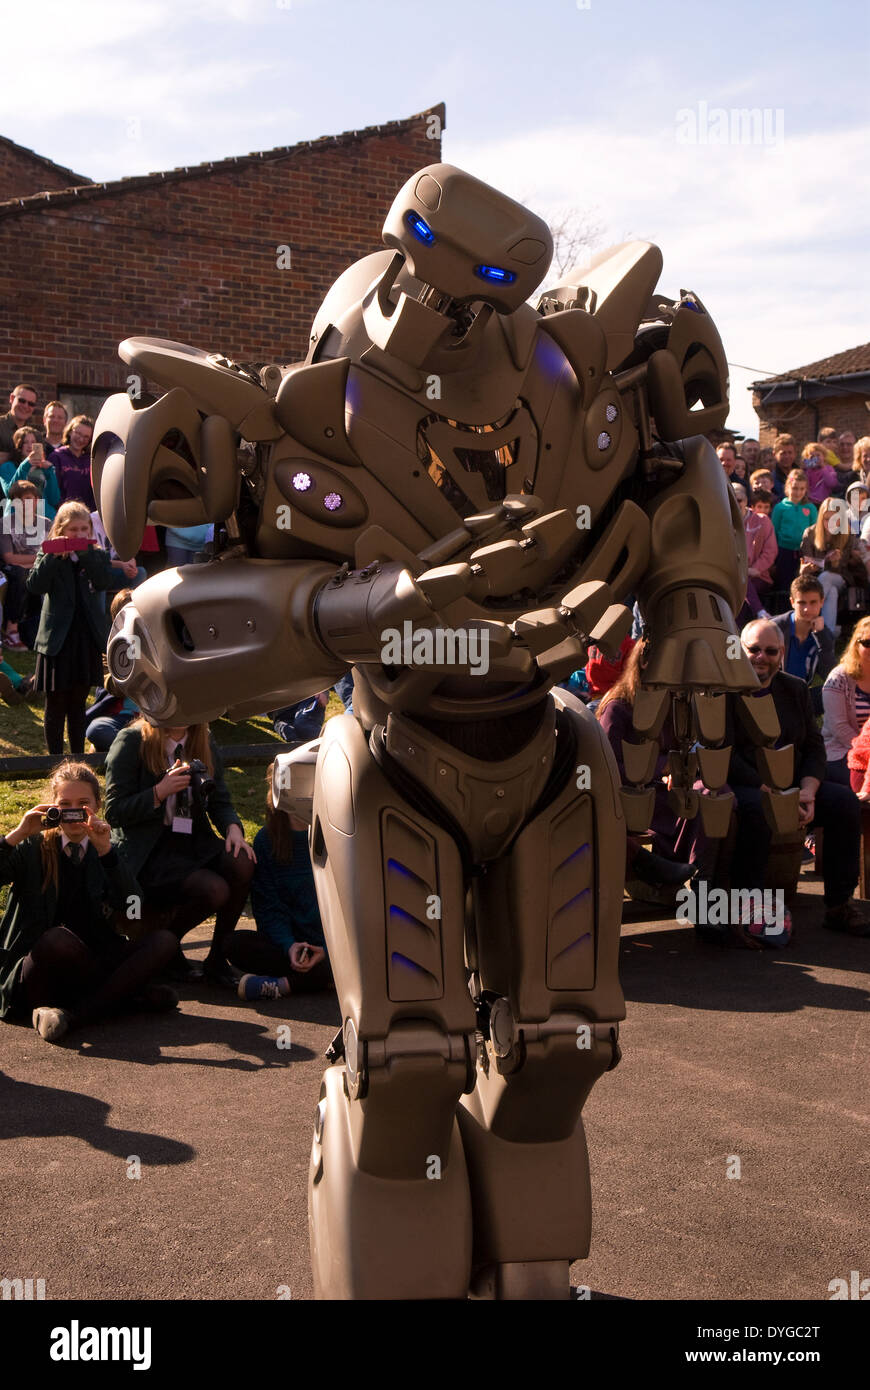 Titan the Robot appearing at the STEM (Science, Technology, Engineering, Mathematics) Festival, Liphook, Hampshire, UK. Stock Photo